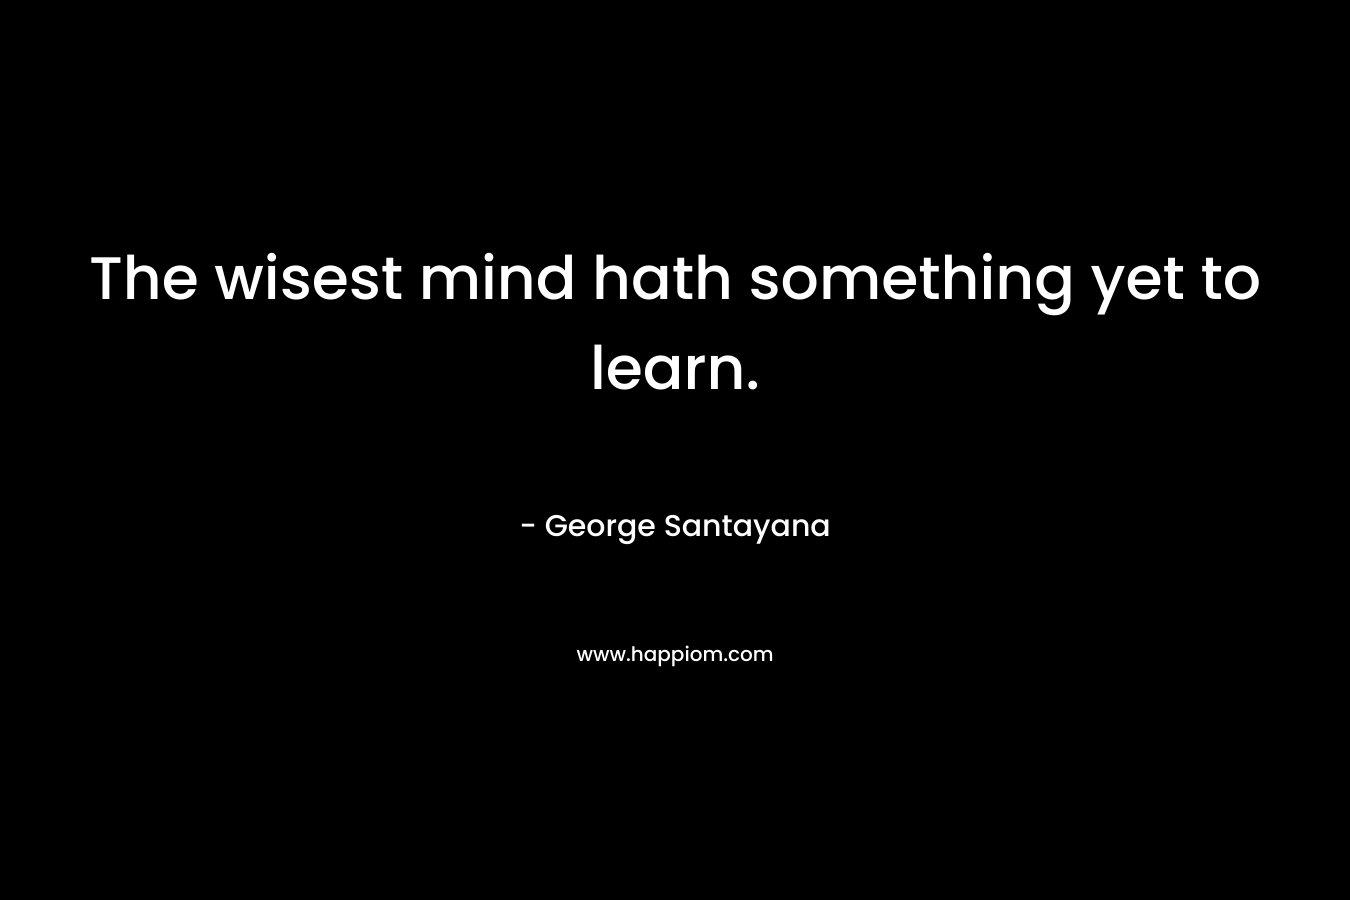 The wisest mind hath something yet to learn. – George Santayana